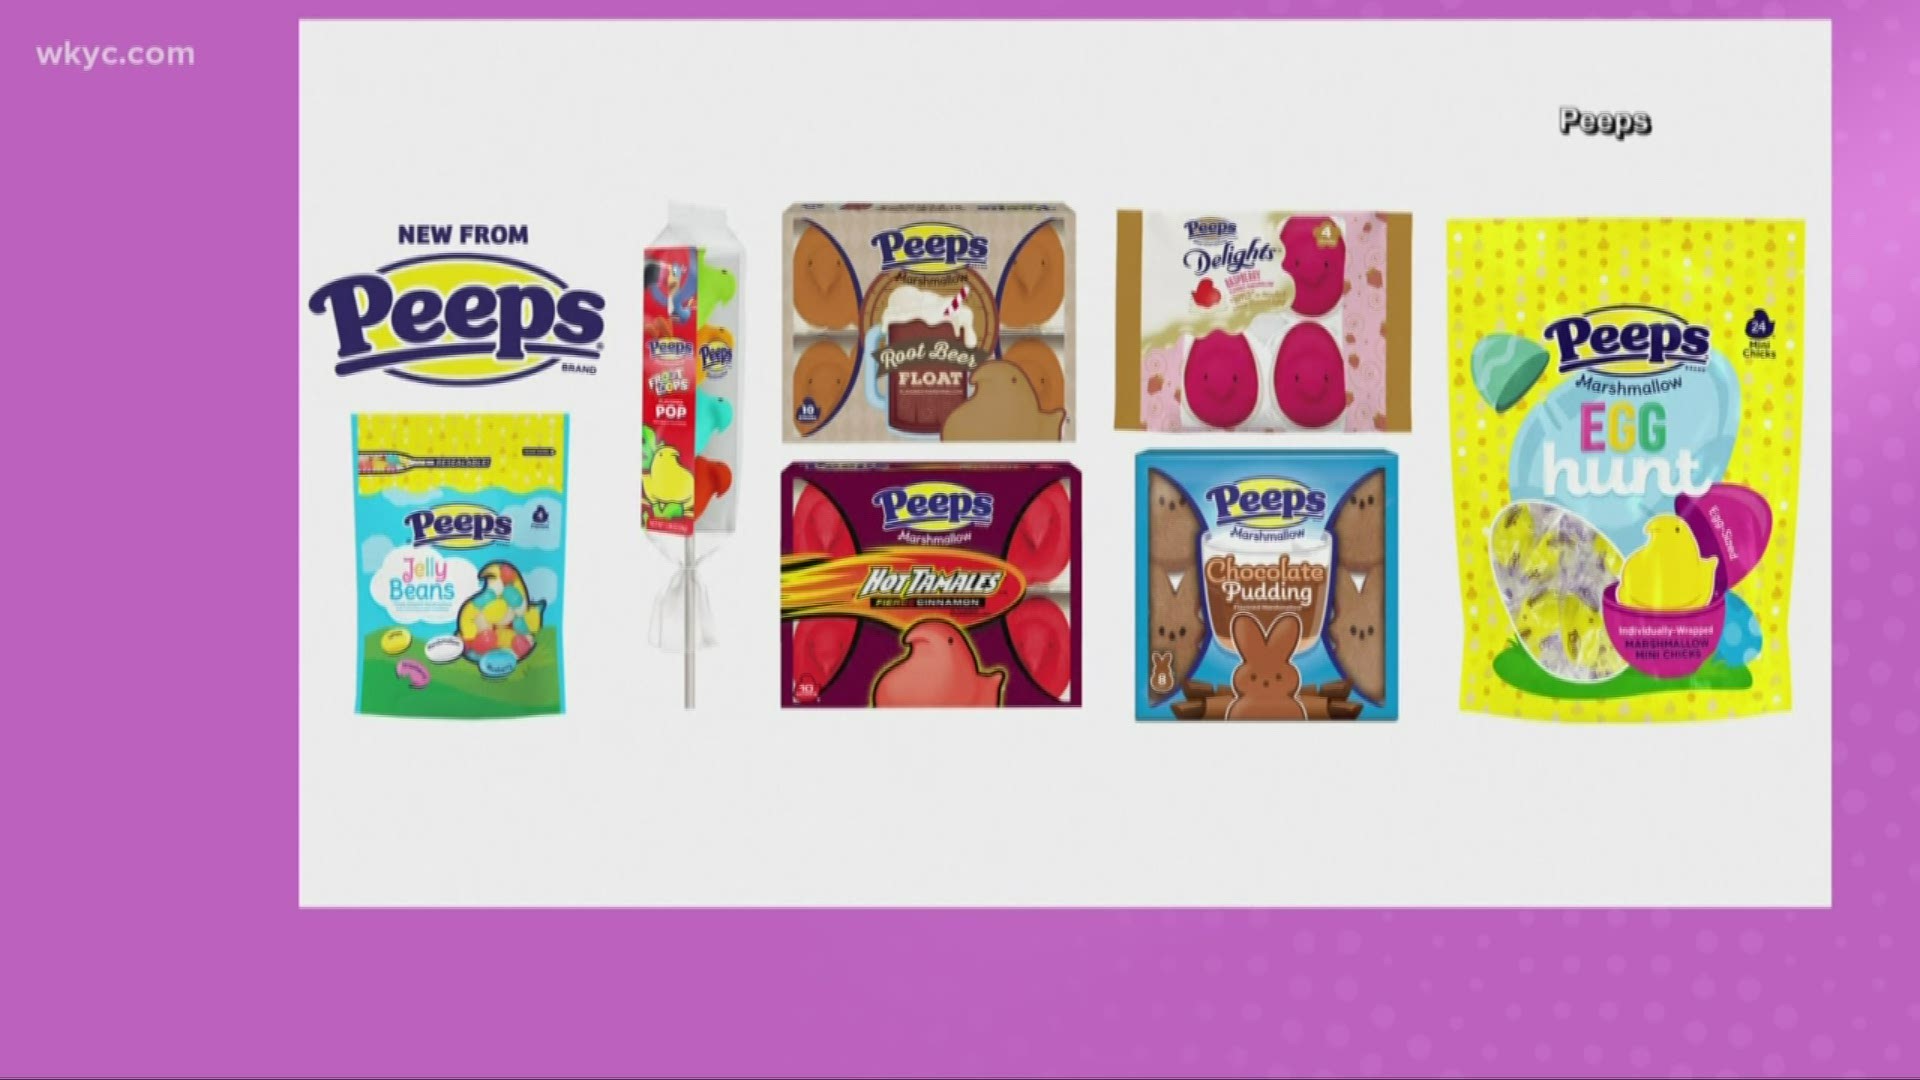 There are seven new Peeps flavors coming this year. How do you feel about the candy?